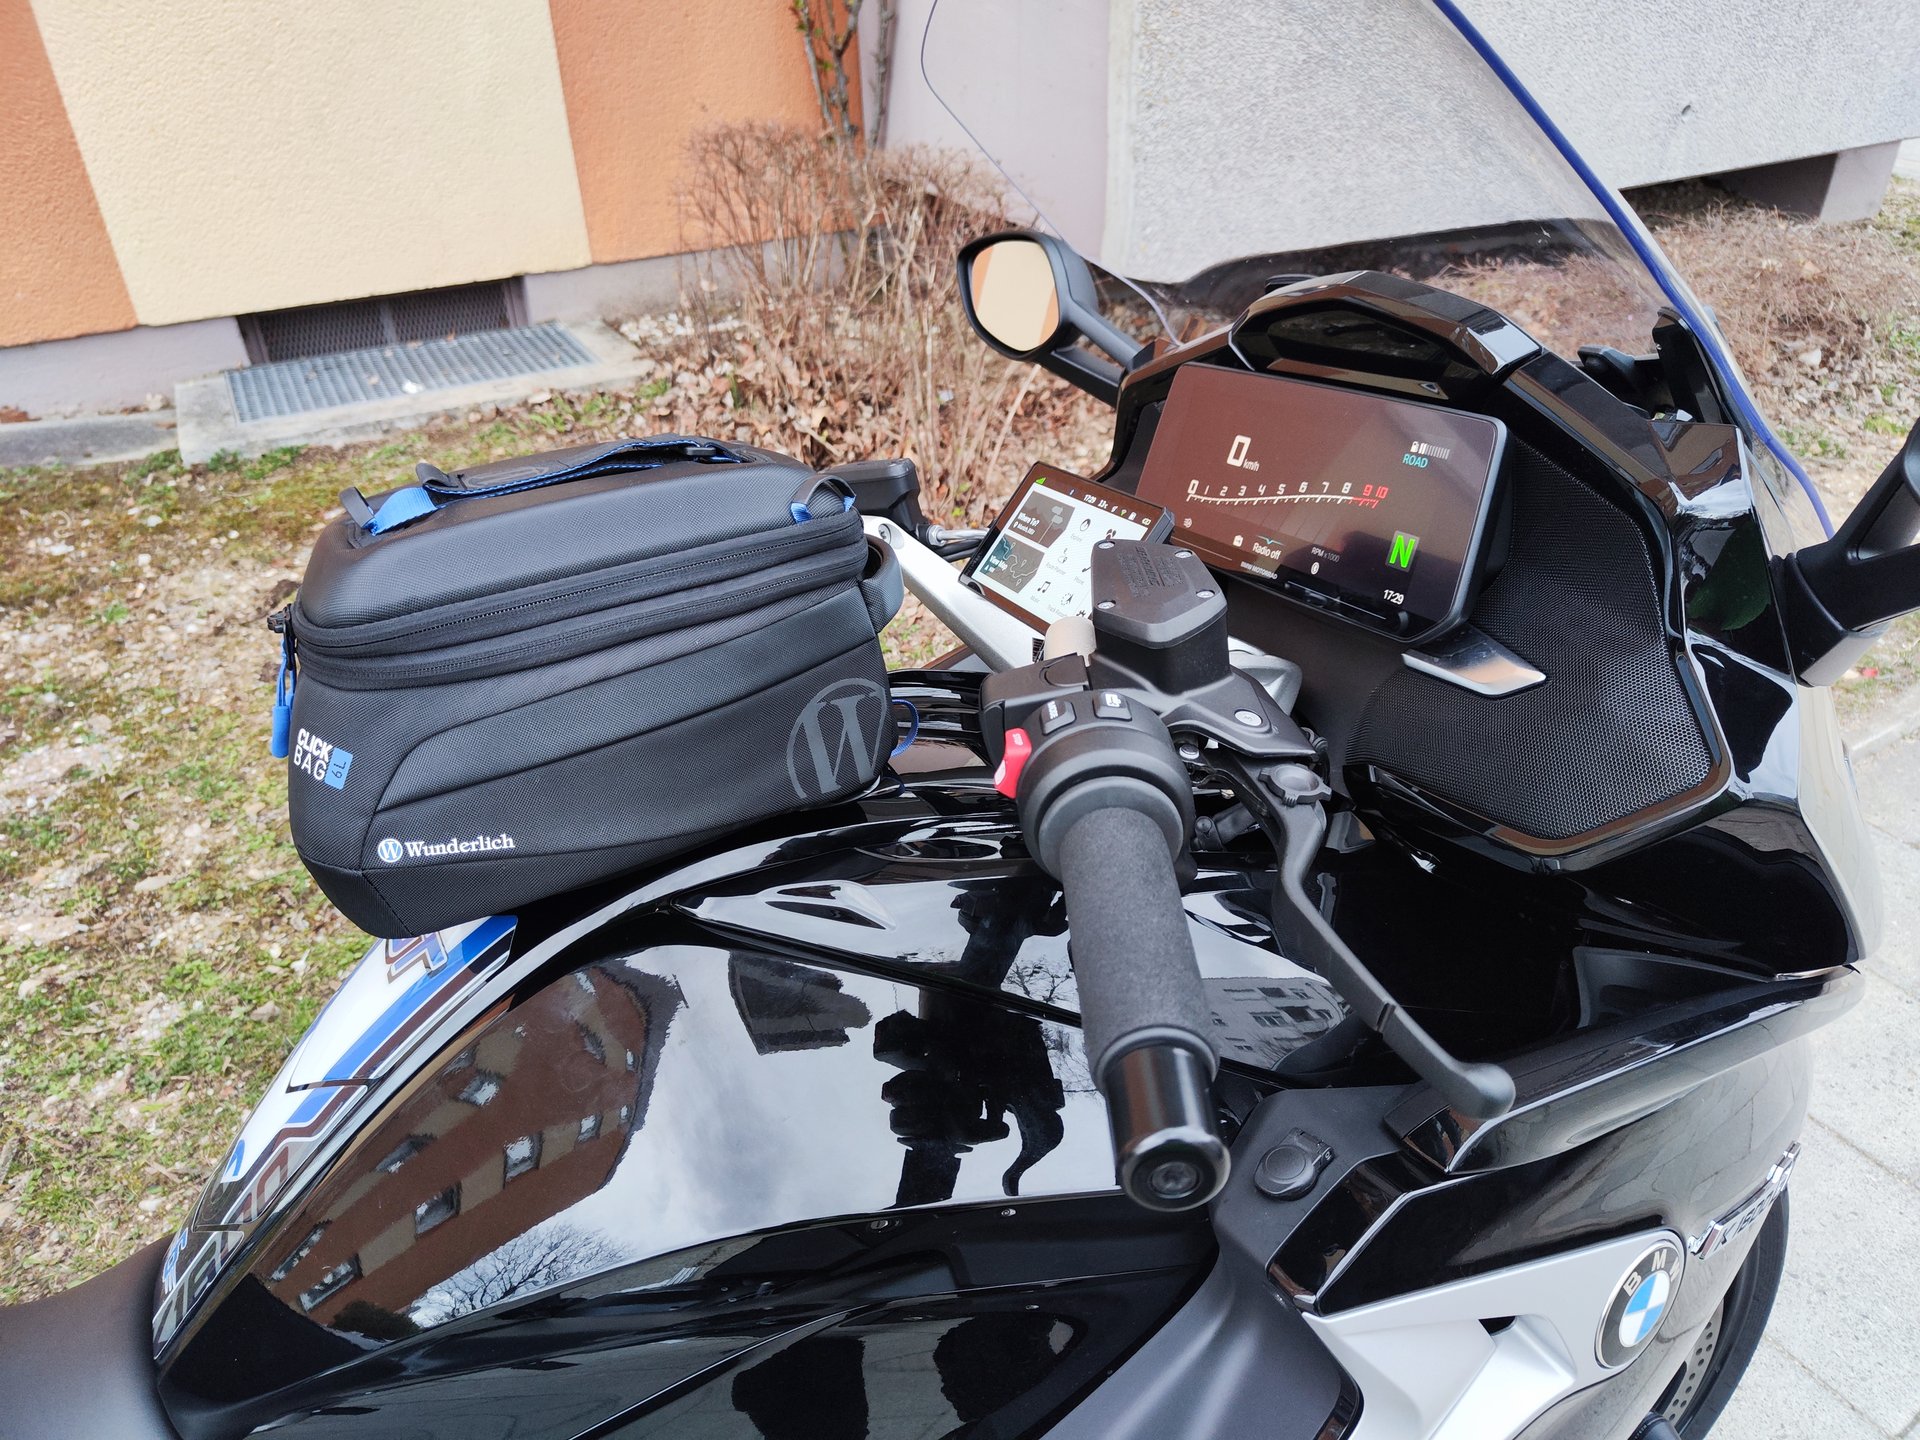 Fitting Wunderlich CLICK BAGS 3, 6 and 13L on BMW K 1600 GT